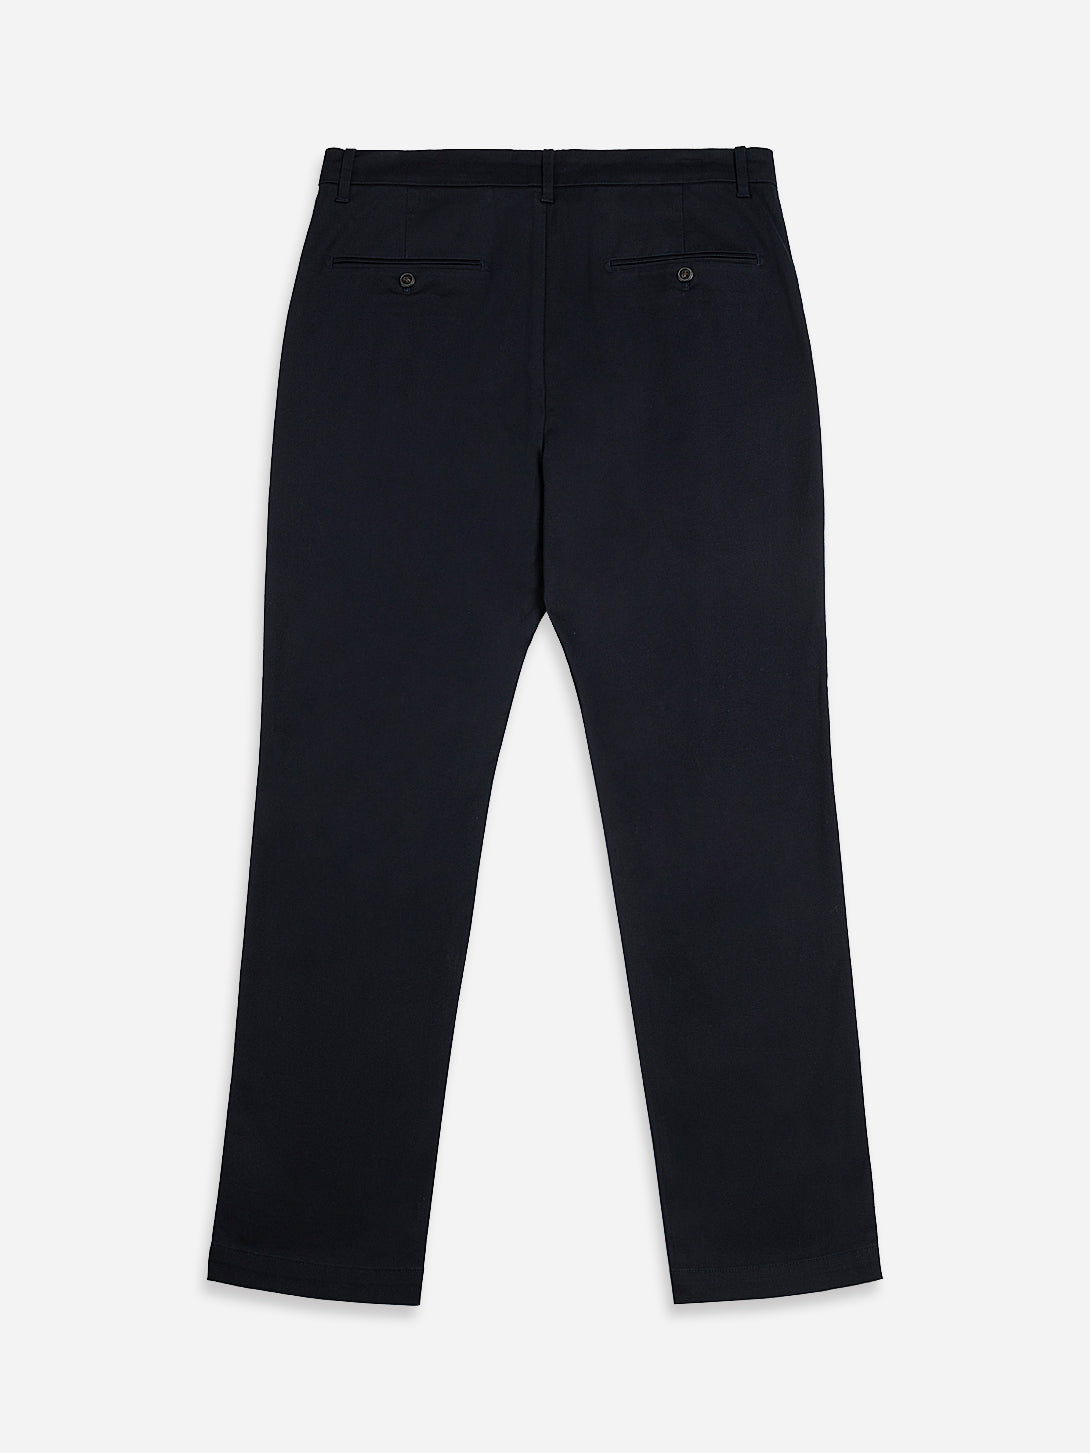 NAVY Niles Stretch Trousers Mens Pleated Relaxed Fit Comfy Stretch